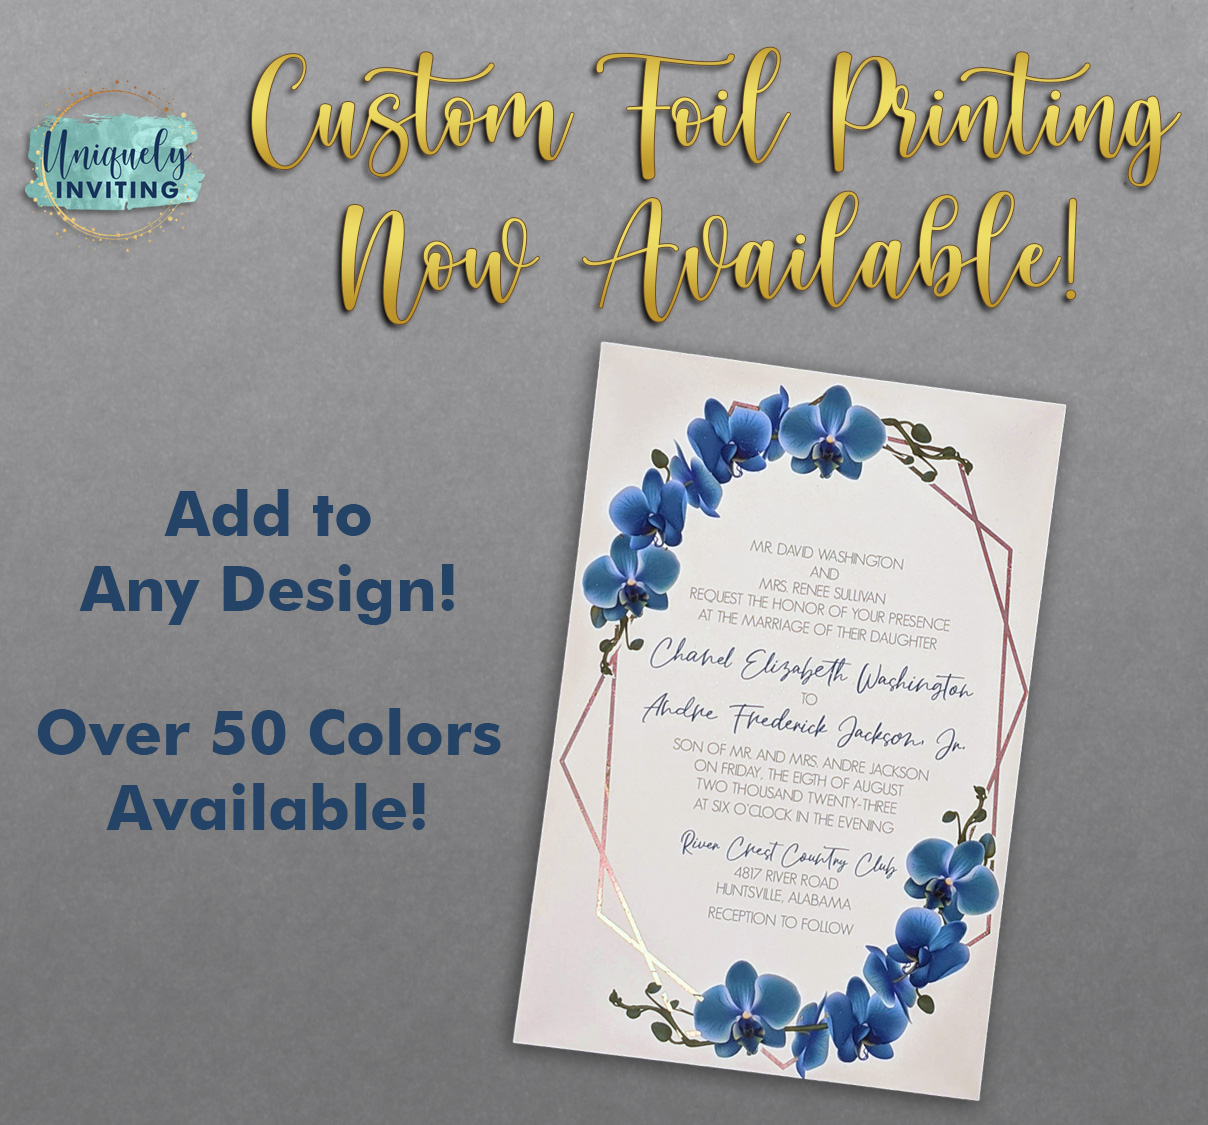 Custom foil printing now available! Add to any design! Over 50 colors to choose from!